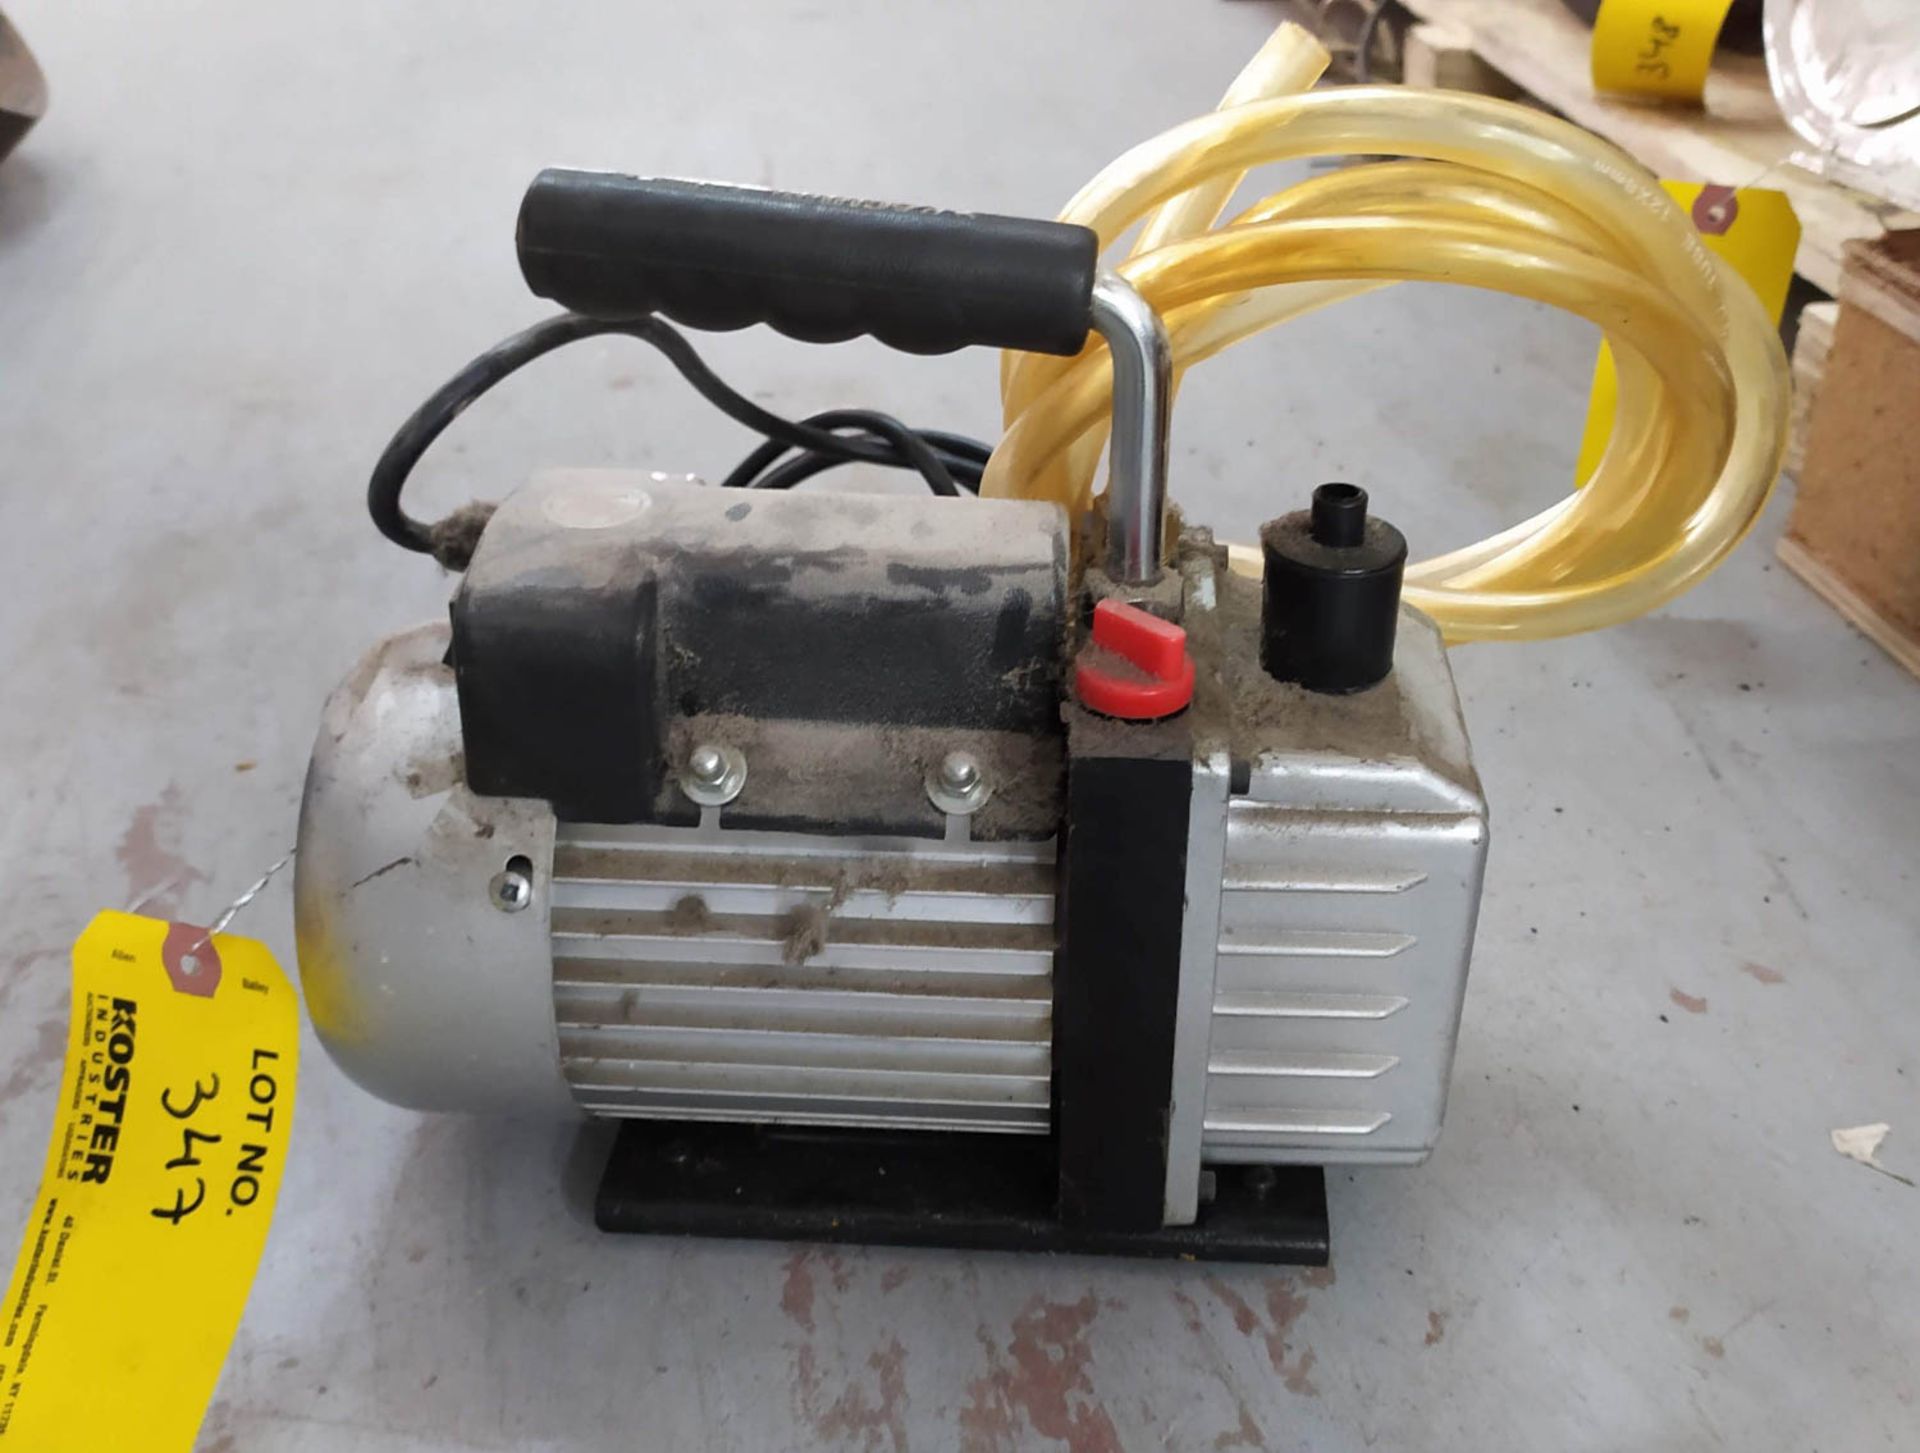 W MDL. 466 VACUUM PUMP; 240V; 50 HZ; 1/6 HP [A#356][LOCATED IN Holon]